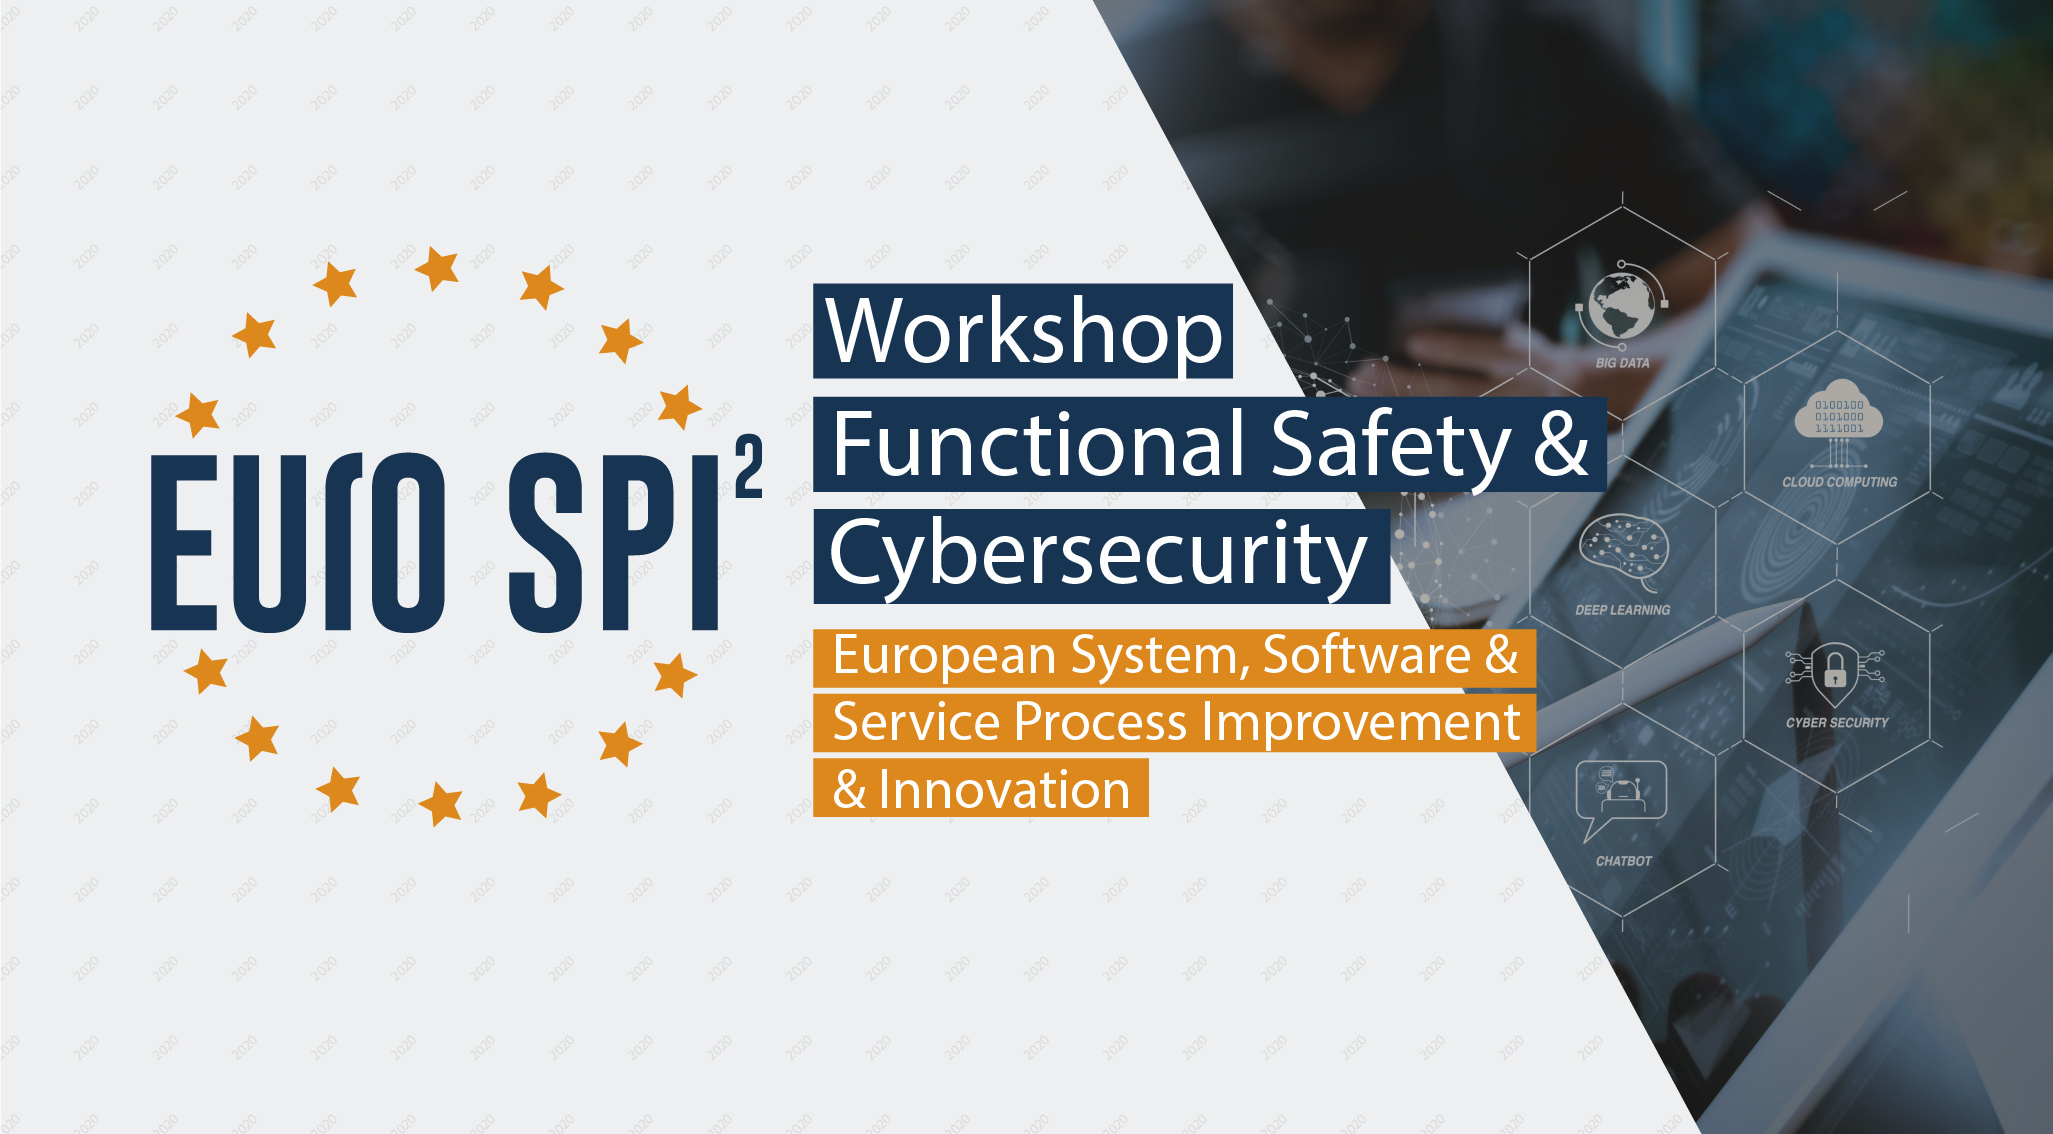 Best Practices in Design of Systems Applying Functional Safety and Cybersecurity